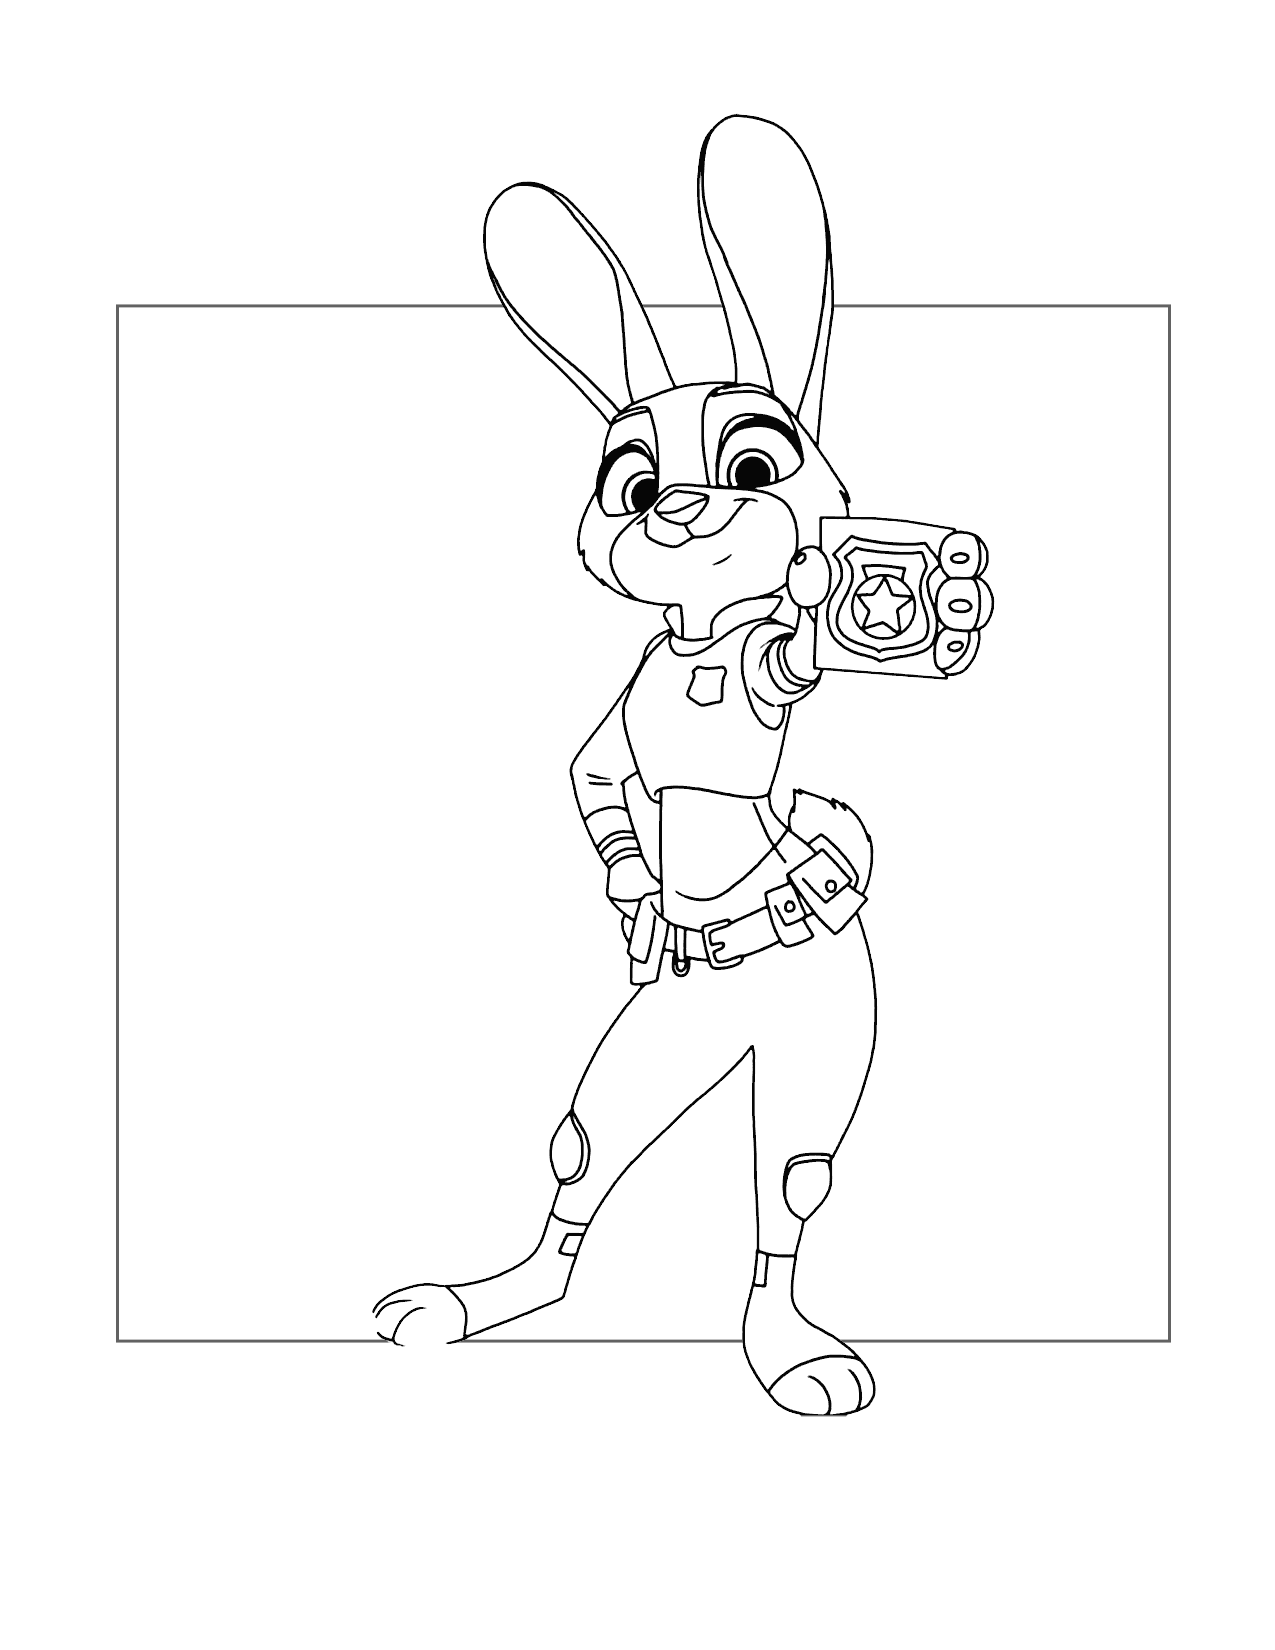 Officer Hopps Zootopia Coloring Page